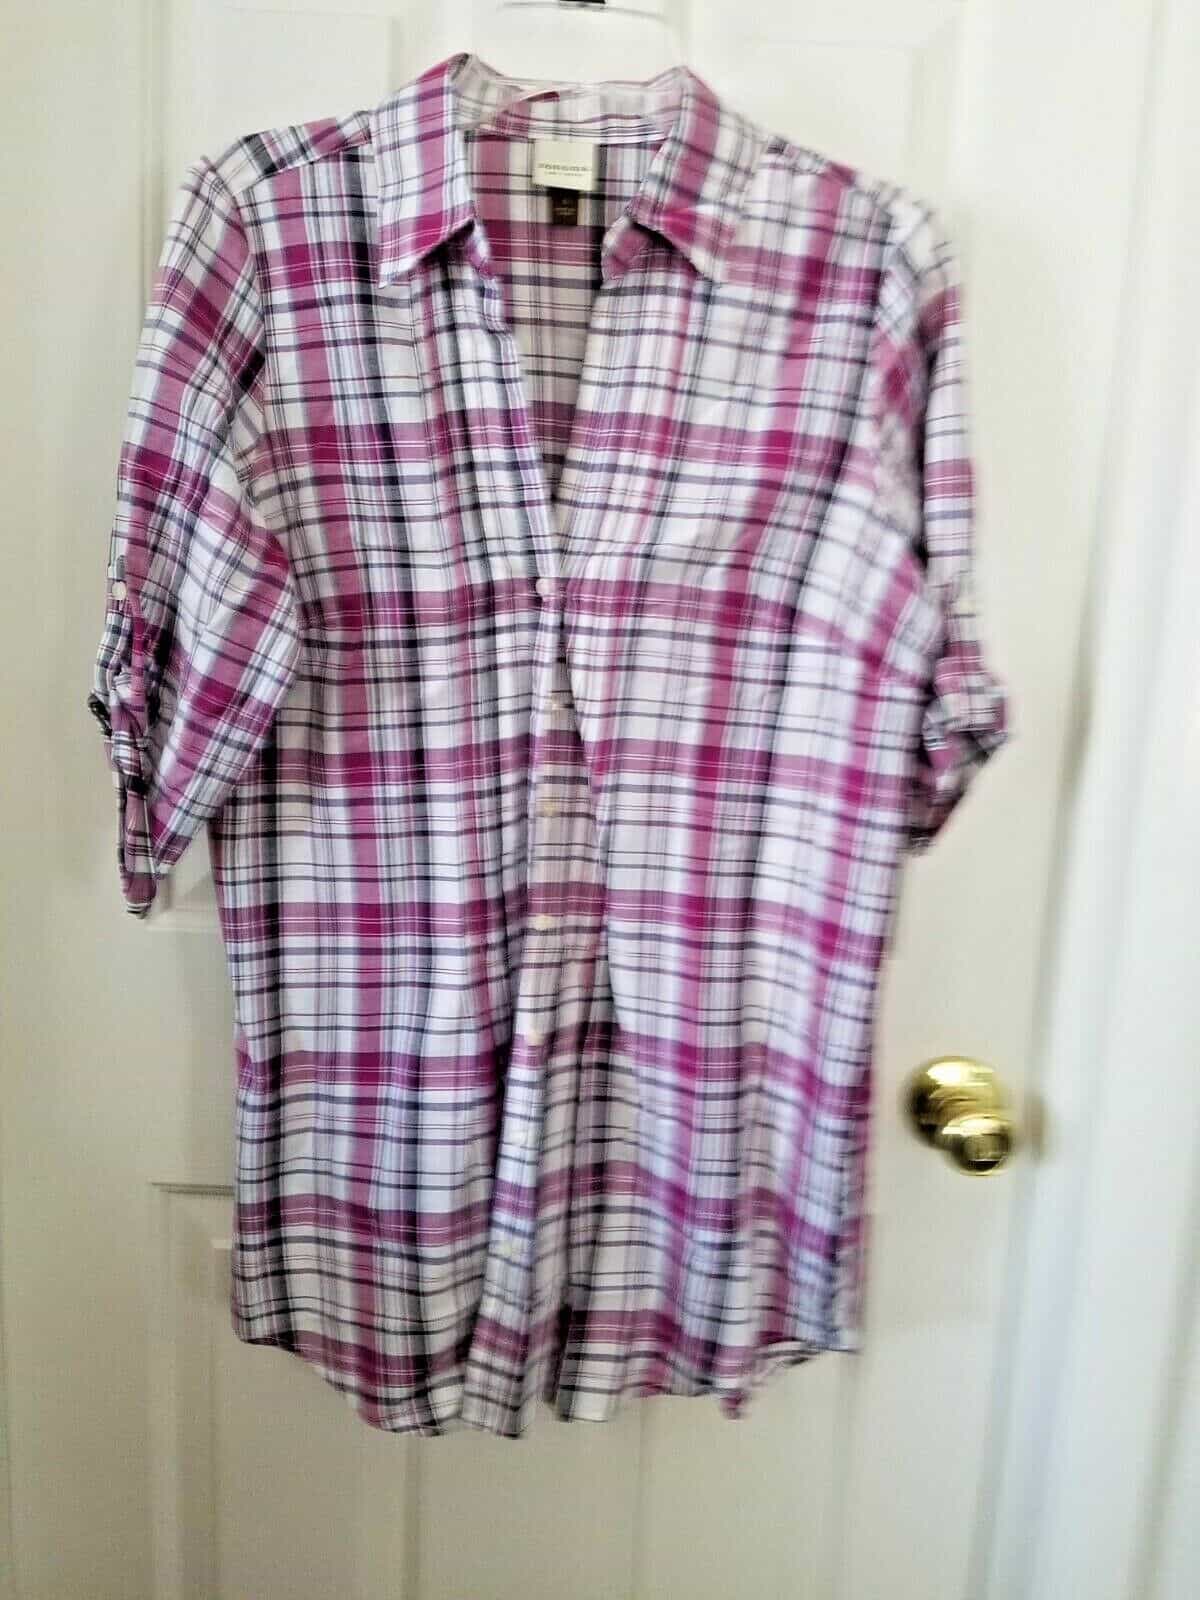 Women's Sonoma Brand Plaid Top With Matching Tank Top Size Small